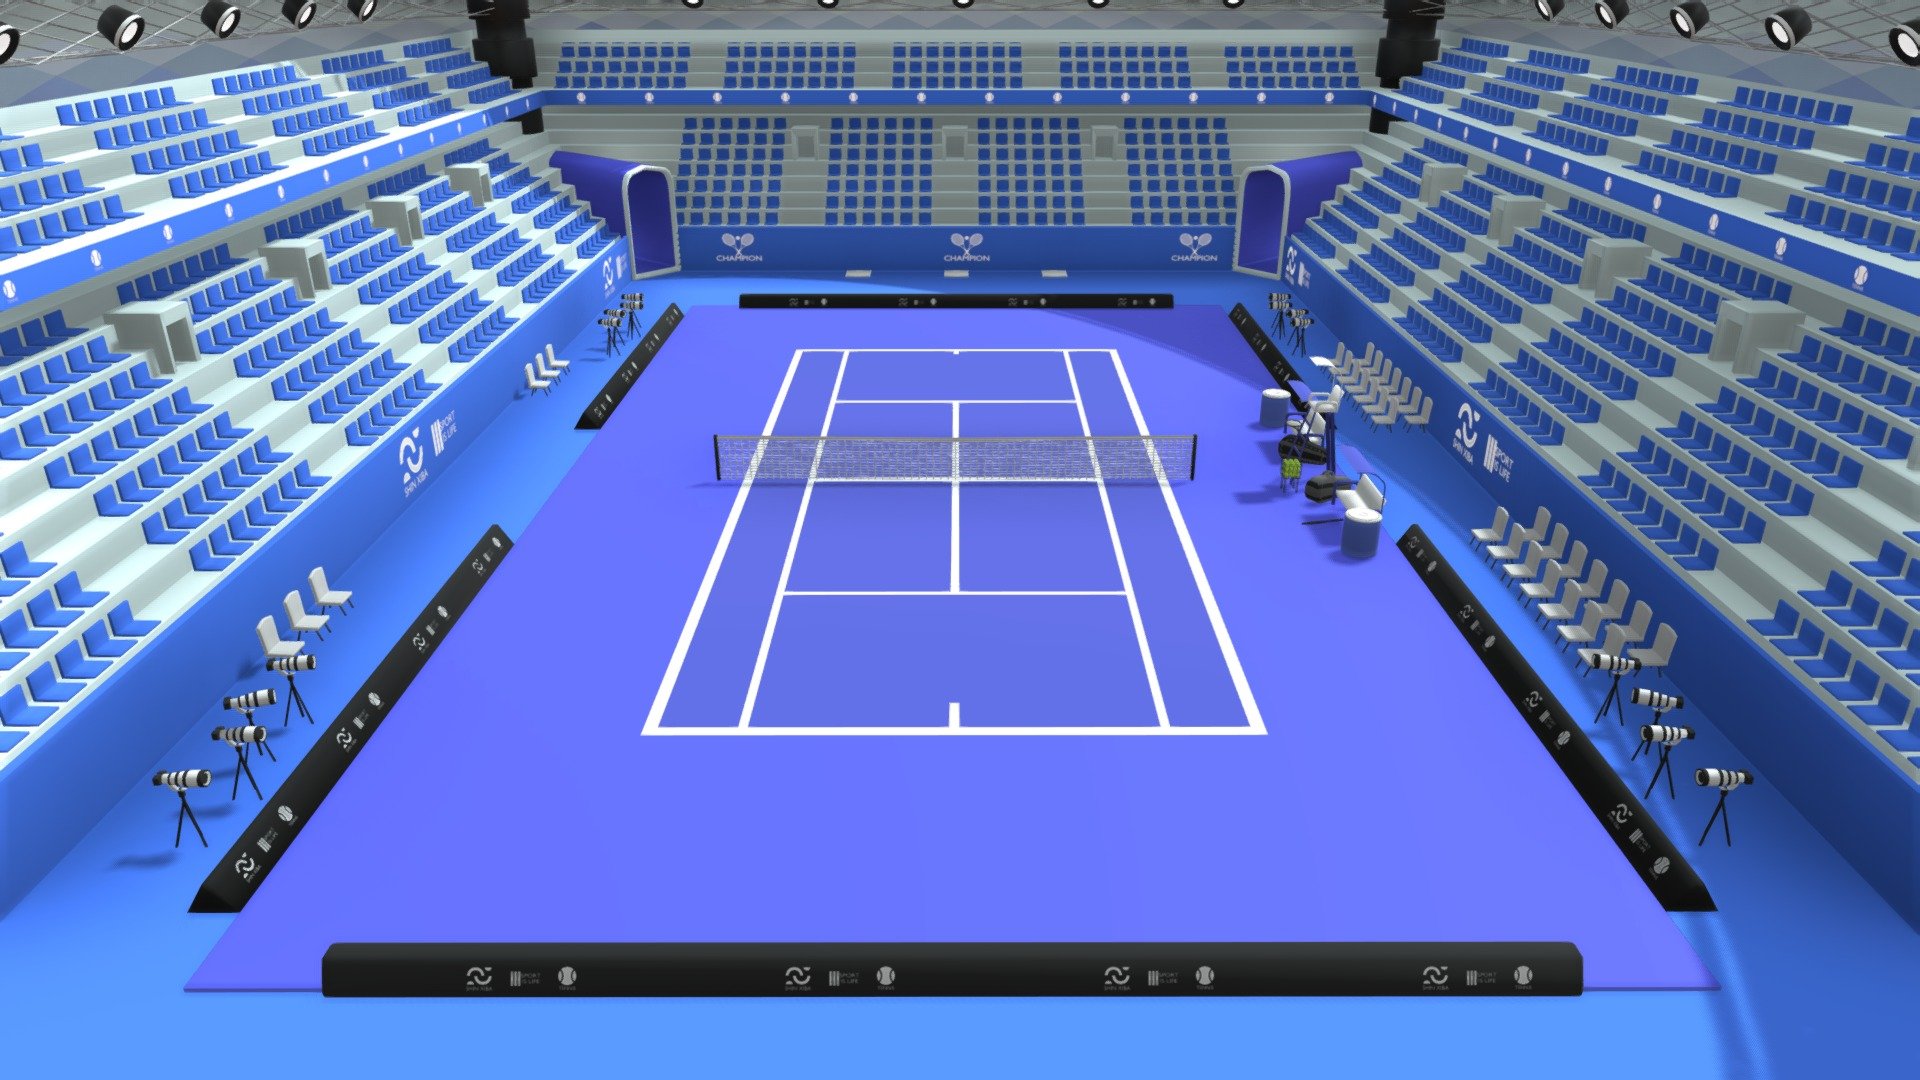 3D model of a tennis stadium with an oval roof in shades of blue and white - Tennis Stadium - 3D Model - Buy Royalty Free 3D model by Shin Xiba 3D (@Xiba3D) 3d model